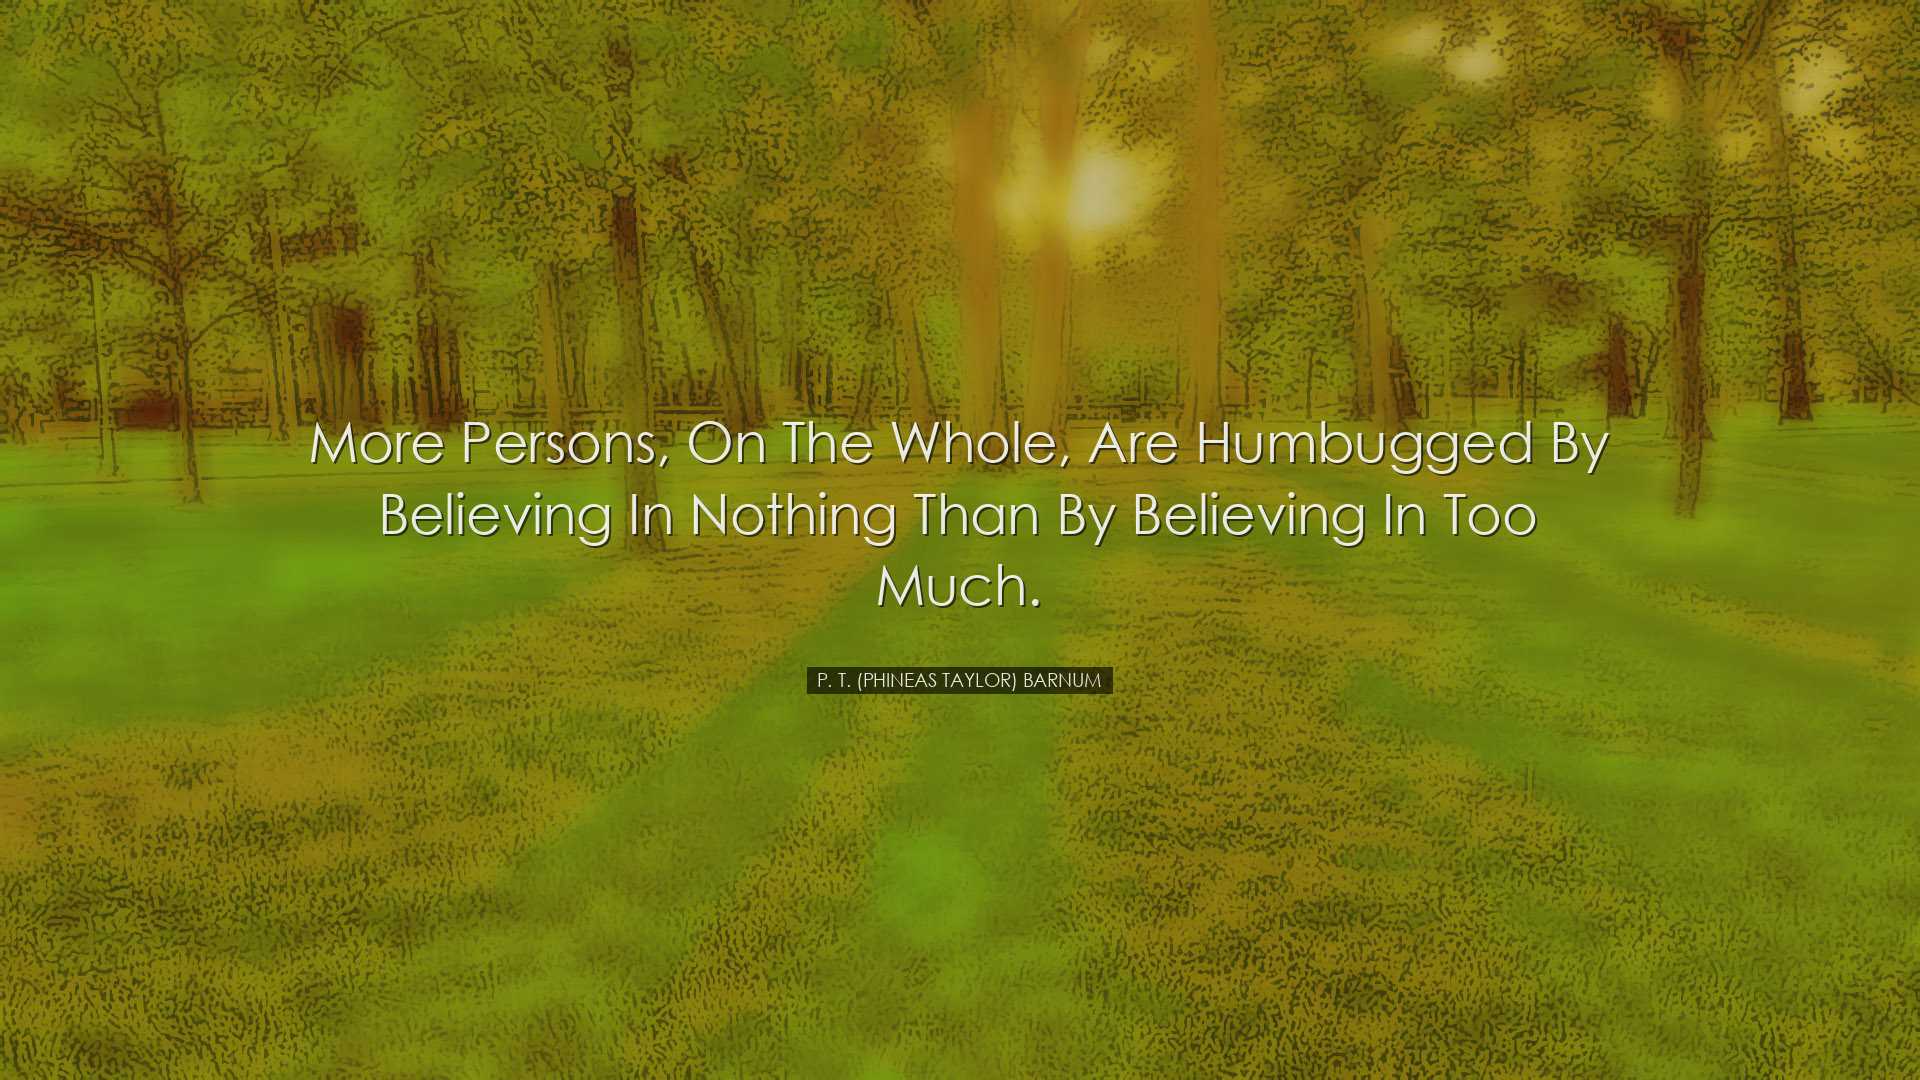 More persons, on the whole, are humbugged by believing in nothing